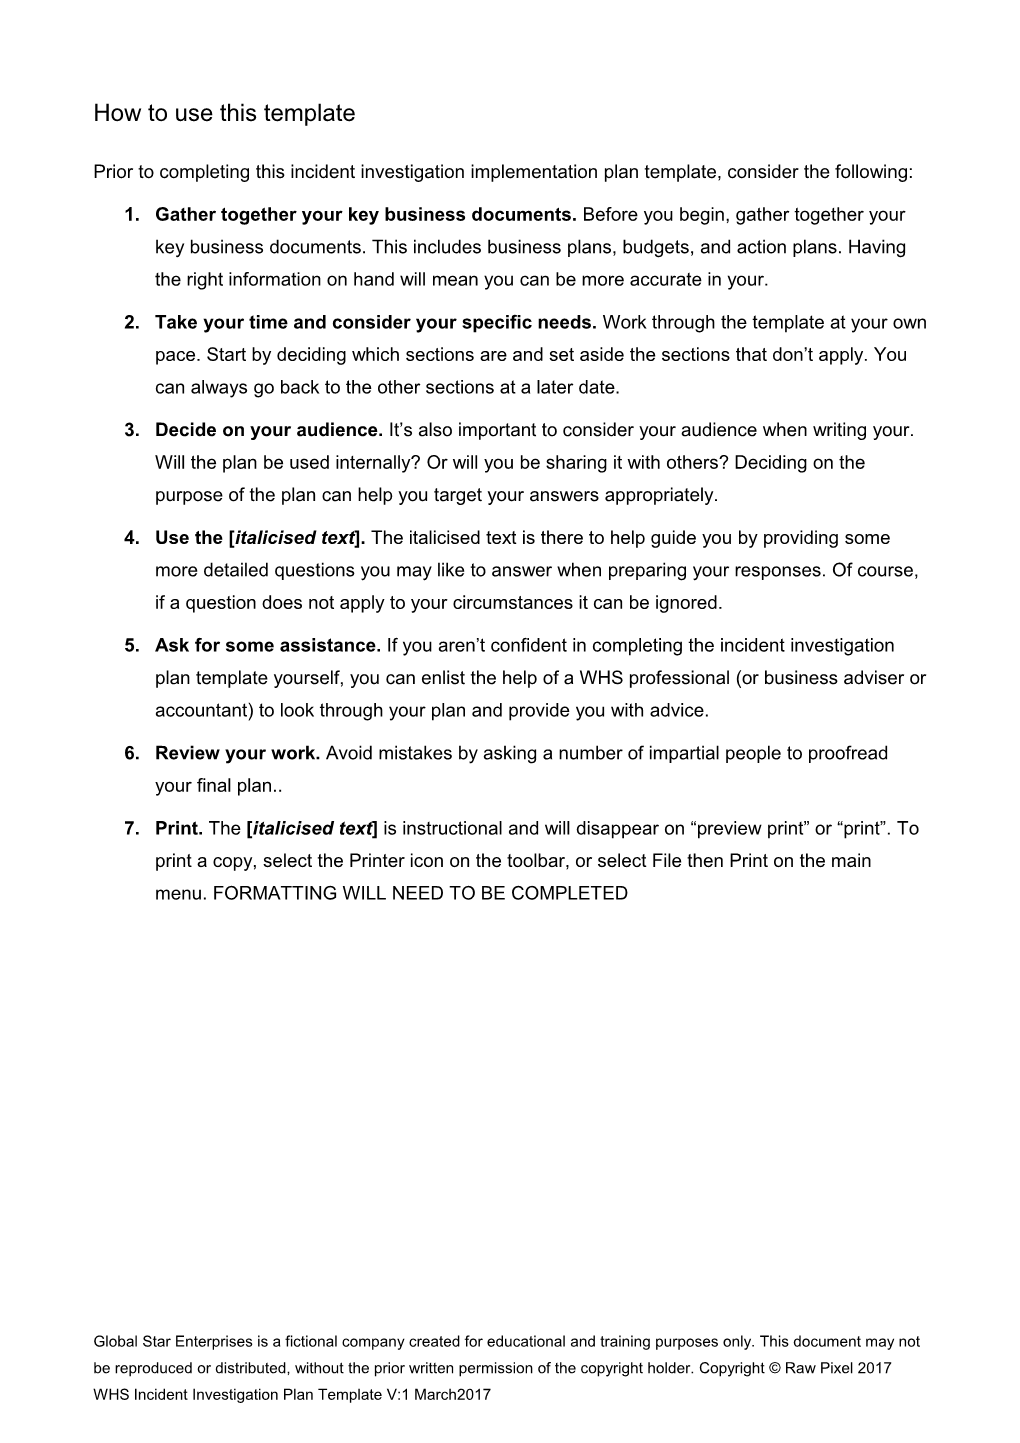 WHS Incident Investigation Plan Template